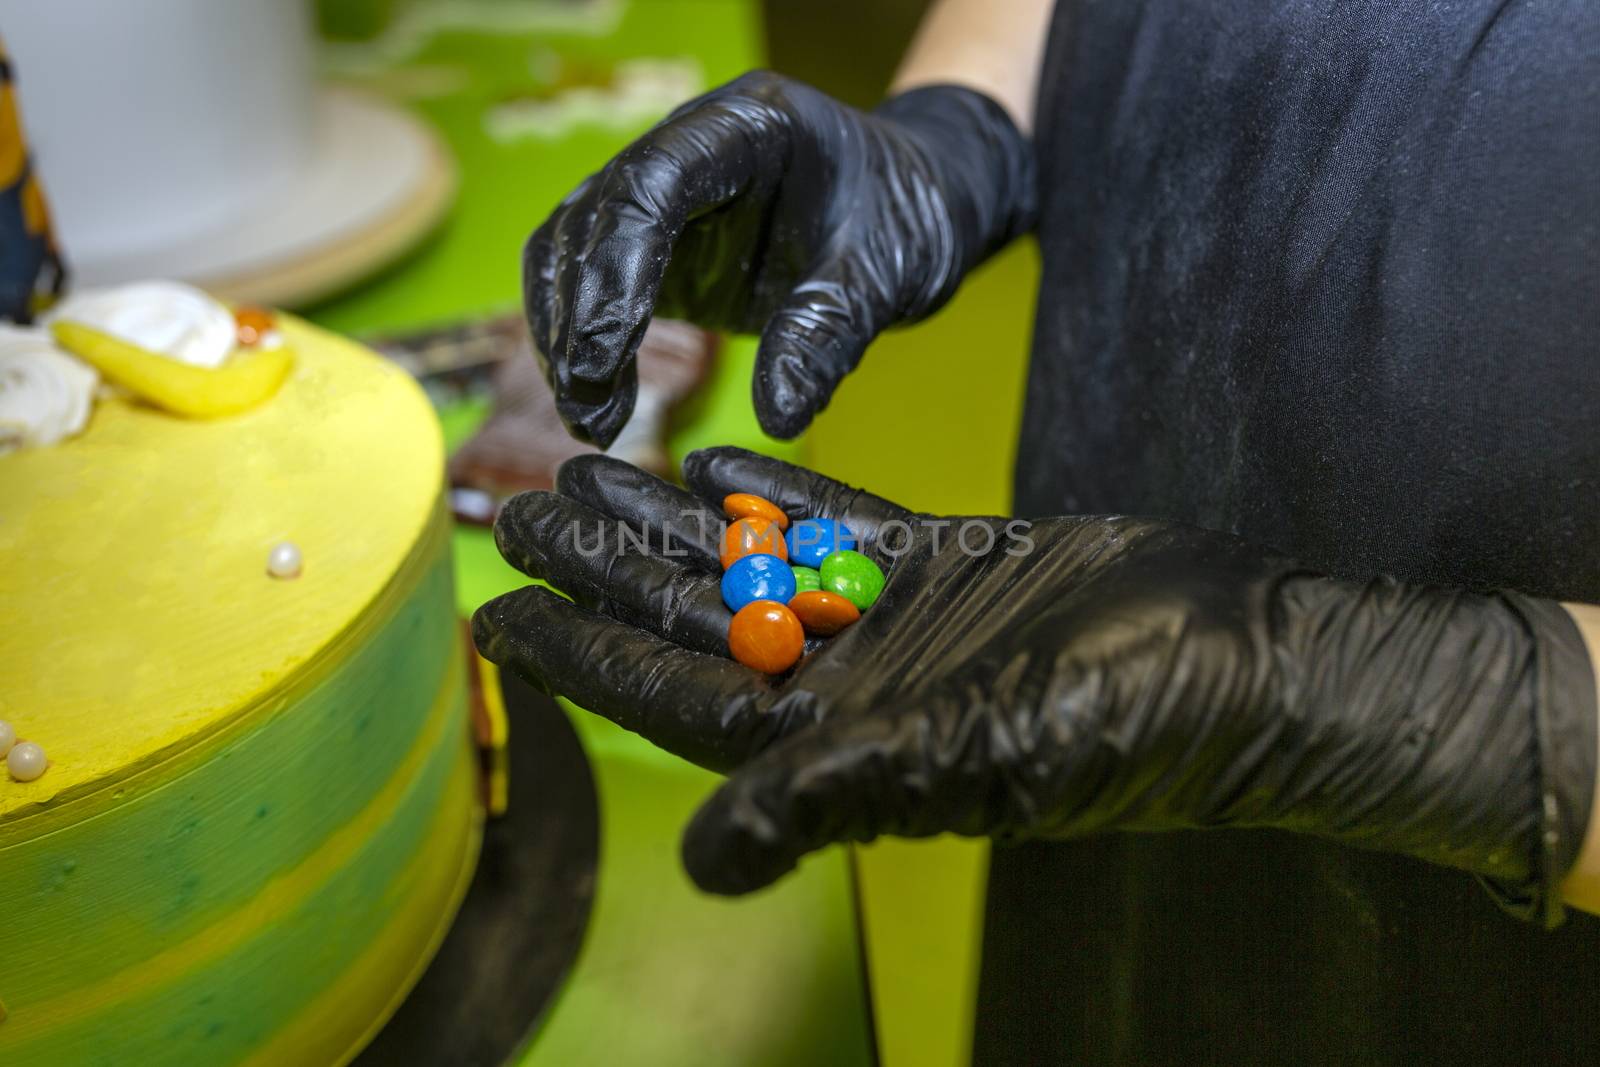 pastry chef decorating cake in the kitchen. Colorful decorations by 977_ReX_977